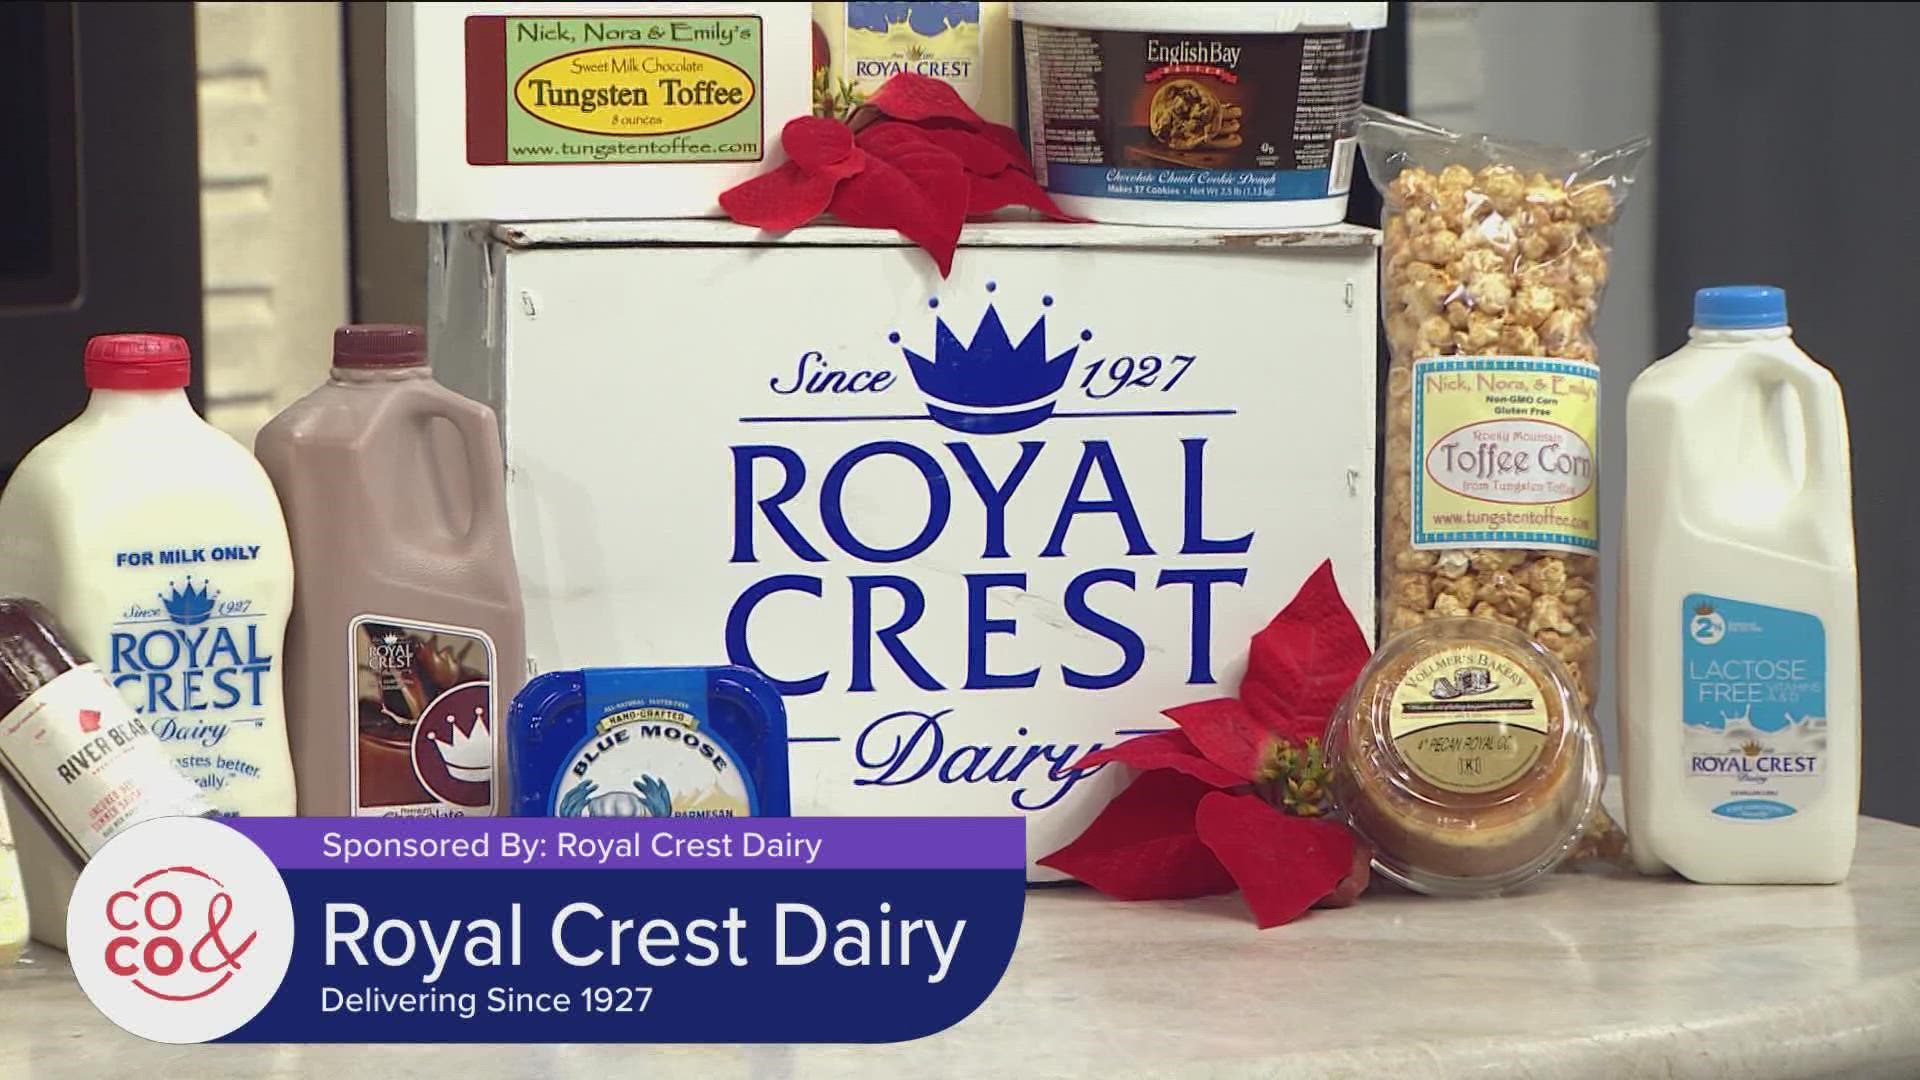 Use the code "Royal" and get 20% off your first order. Find them online at RoyalCrestDairy.com.
You can also follow them on Facebook. **PAID CONTENT**